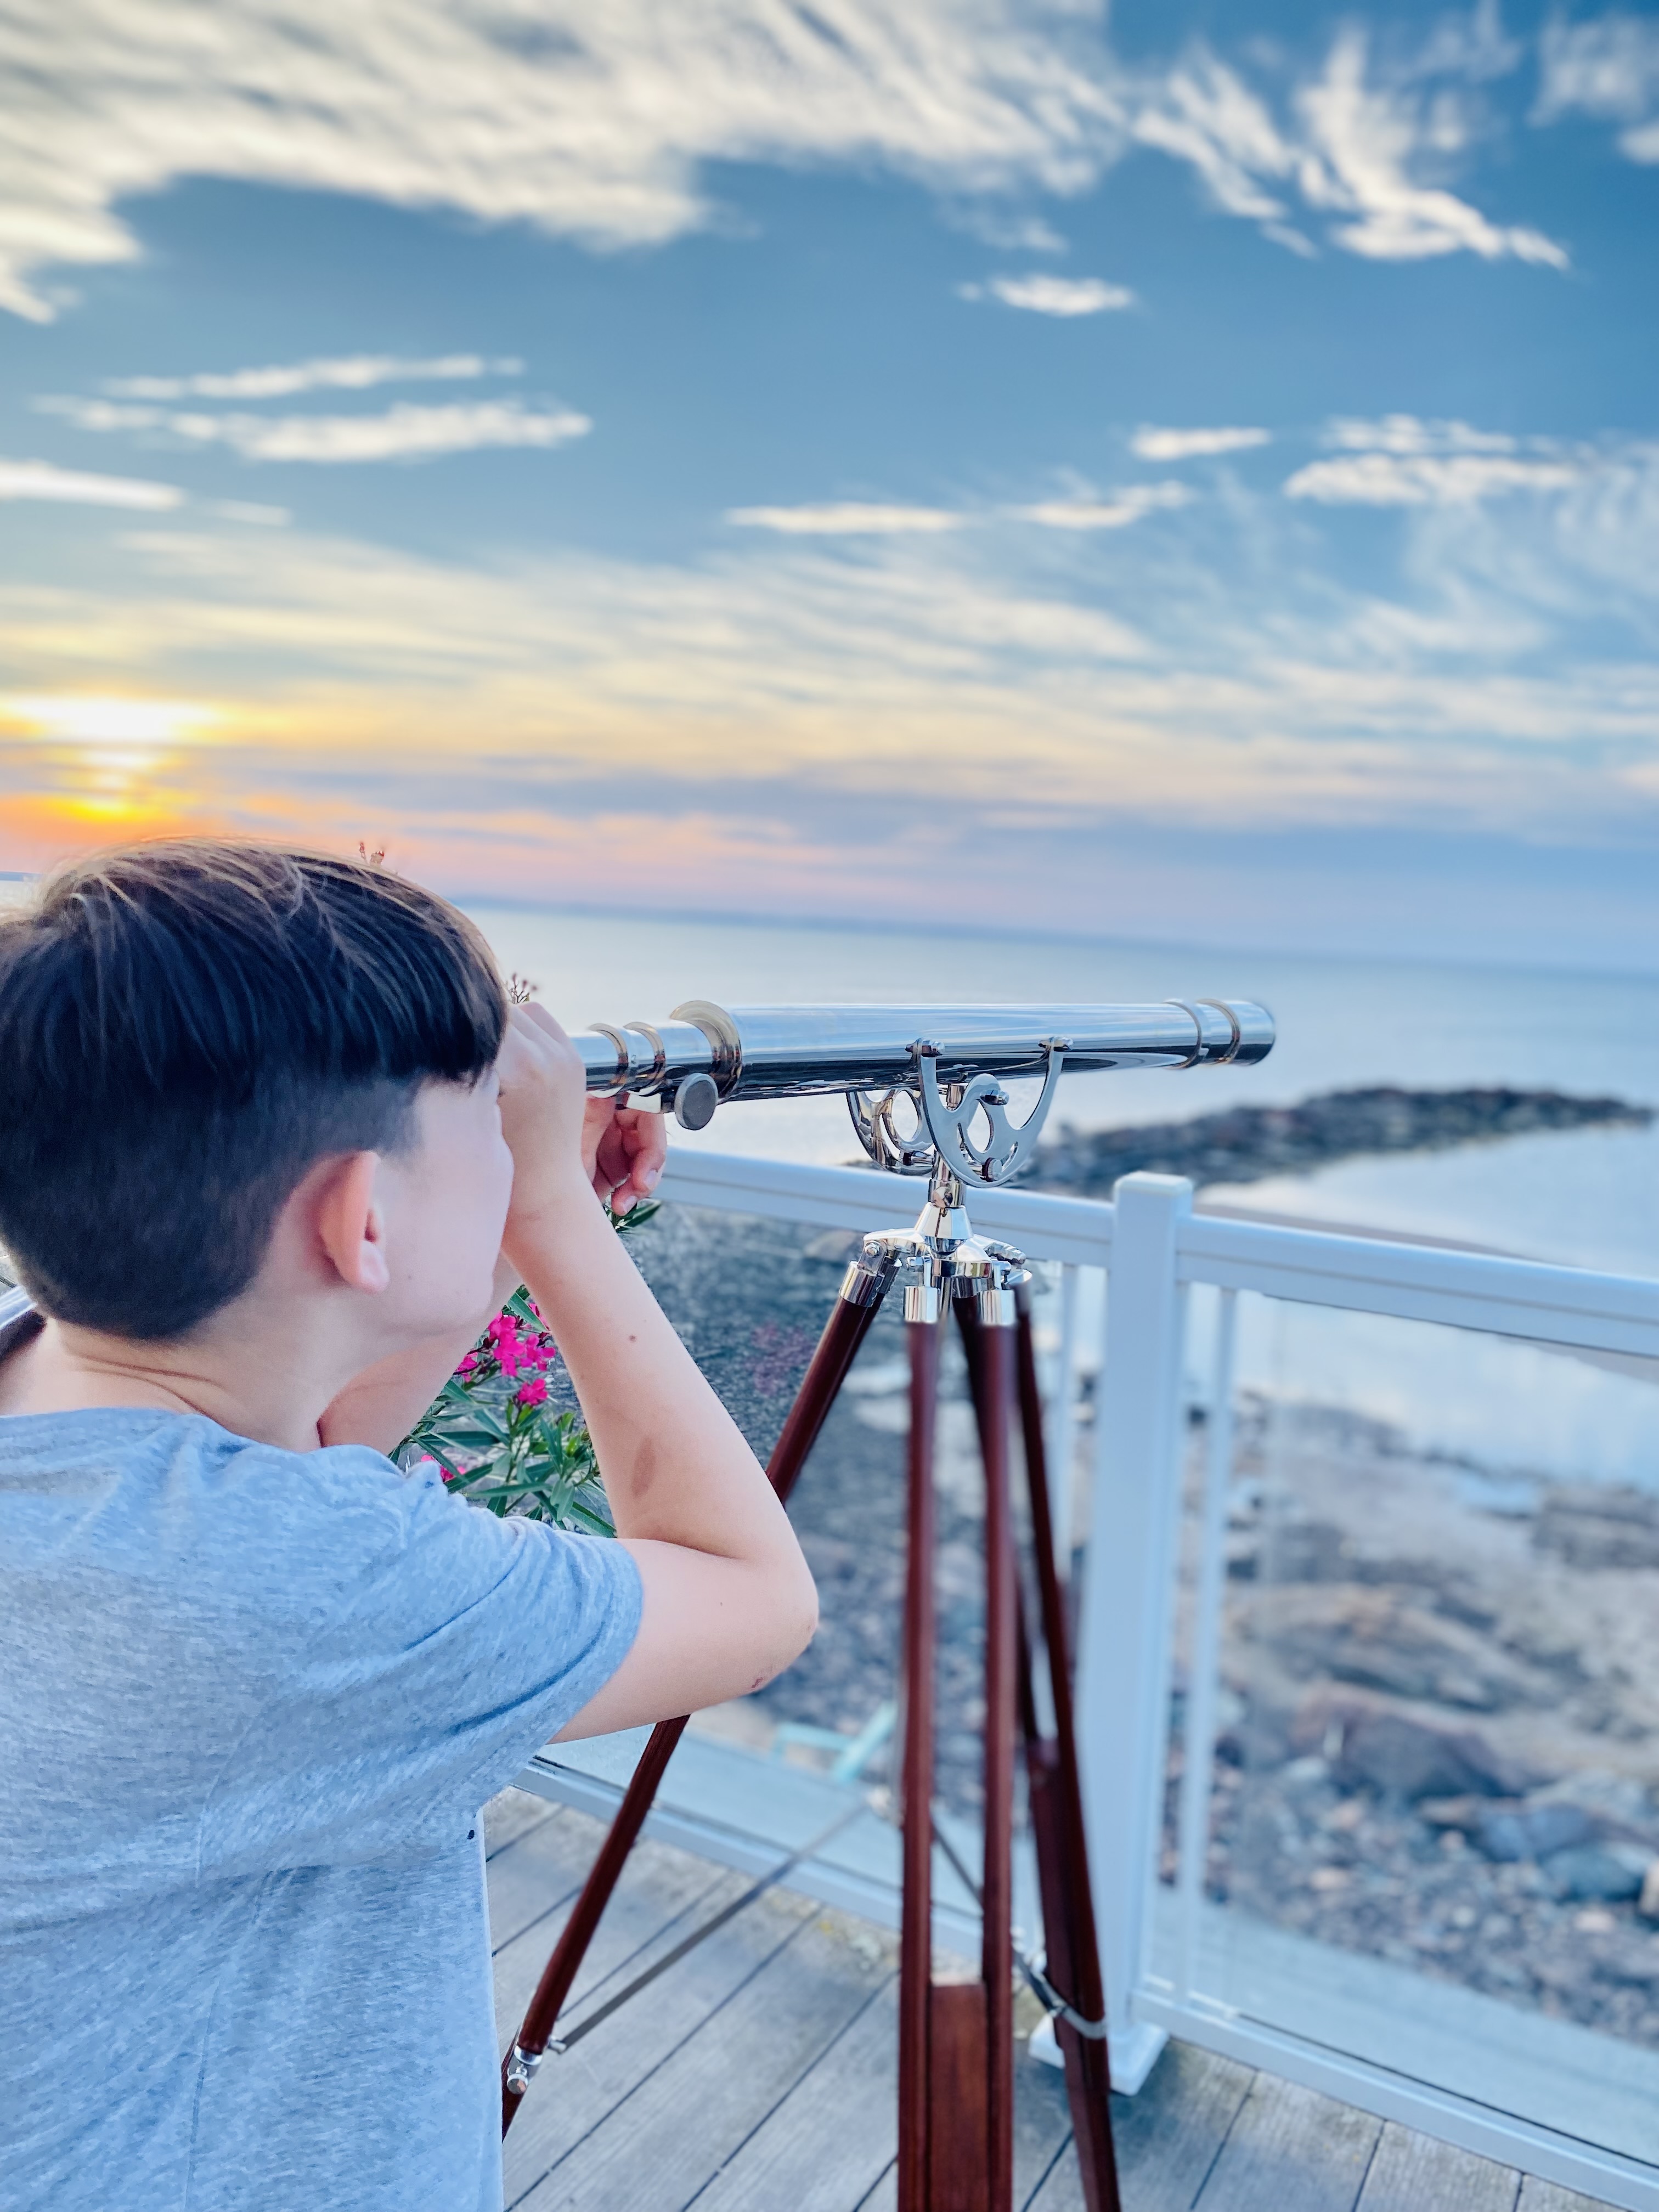 Boy with telescope looking out